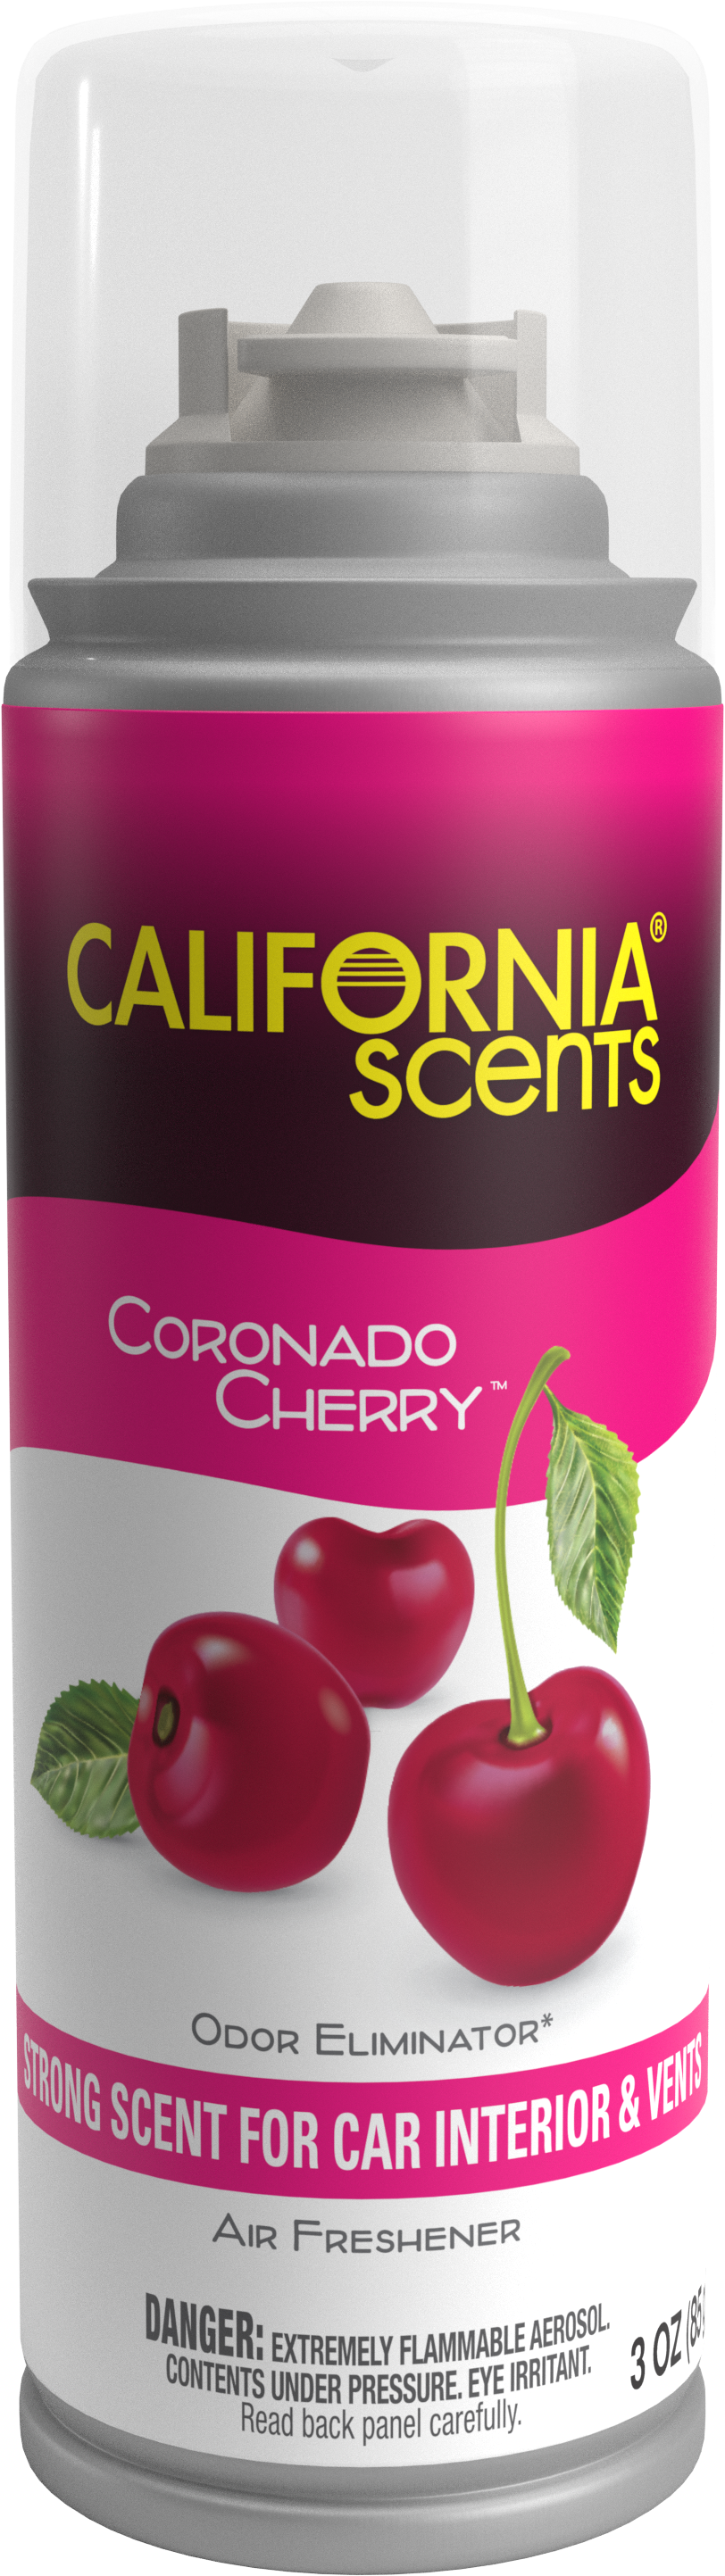 California Scents Air Fresheners at